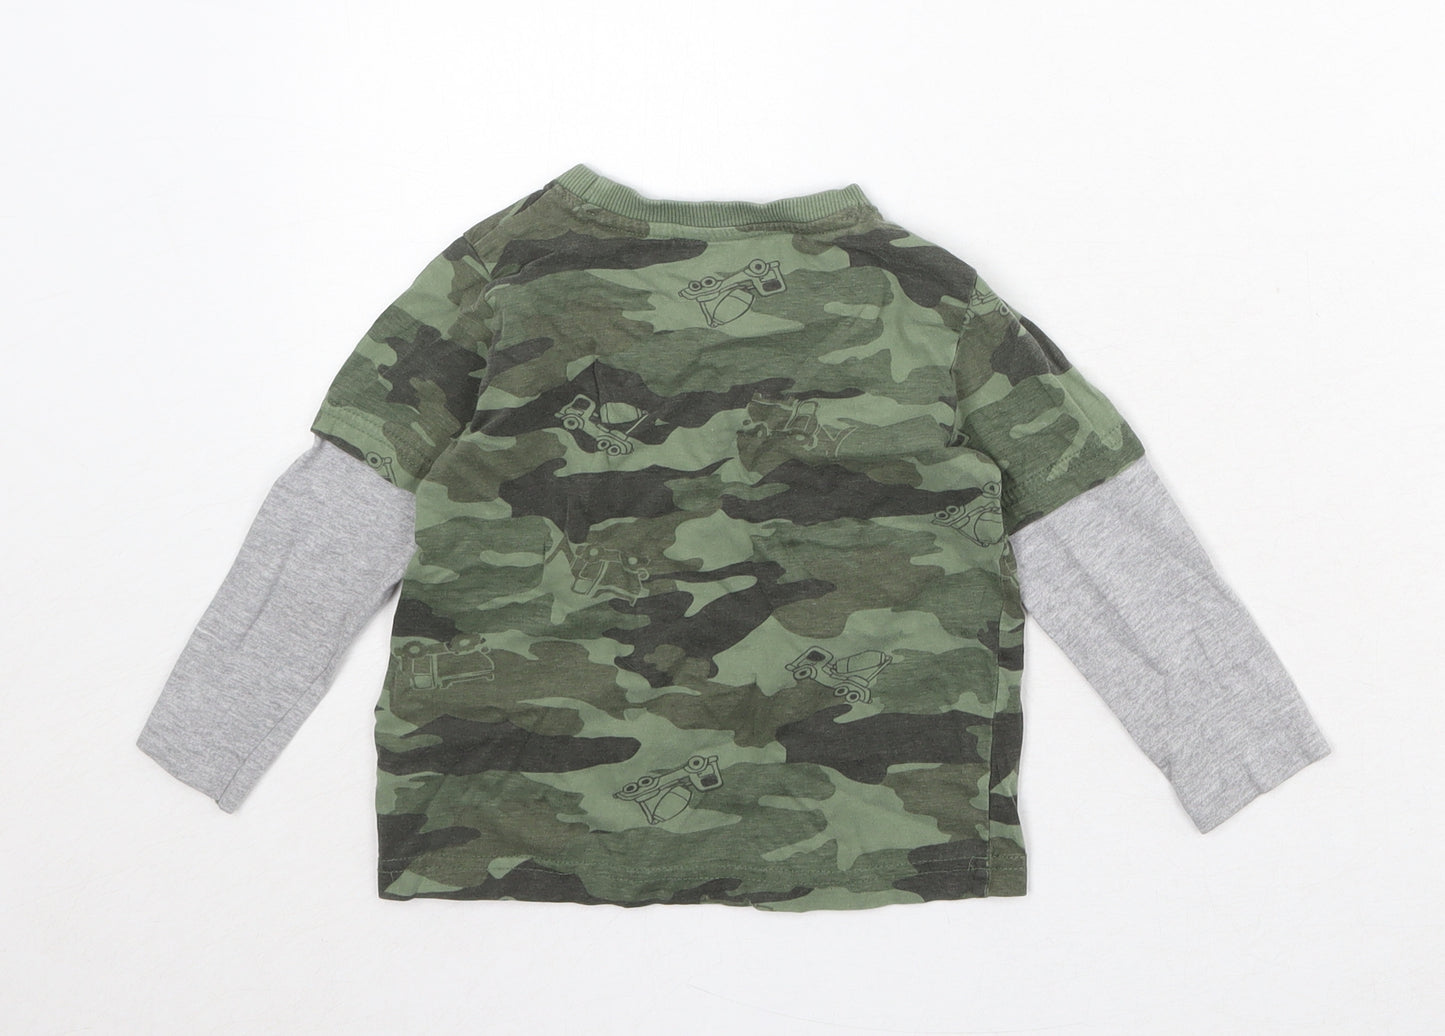 M&Co Boys Green Camouflage Cotton Basic T-Shirt Size 3-4 Years Round Neck Pullover